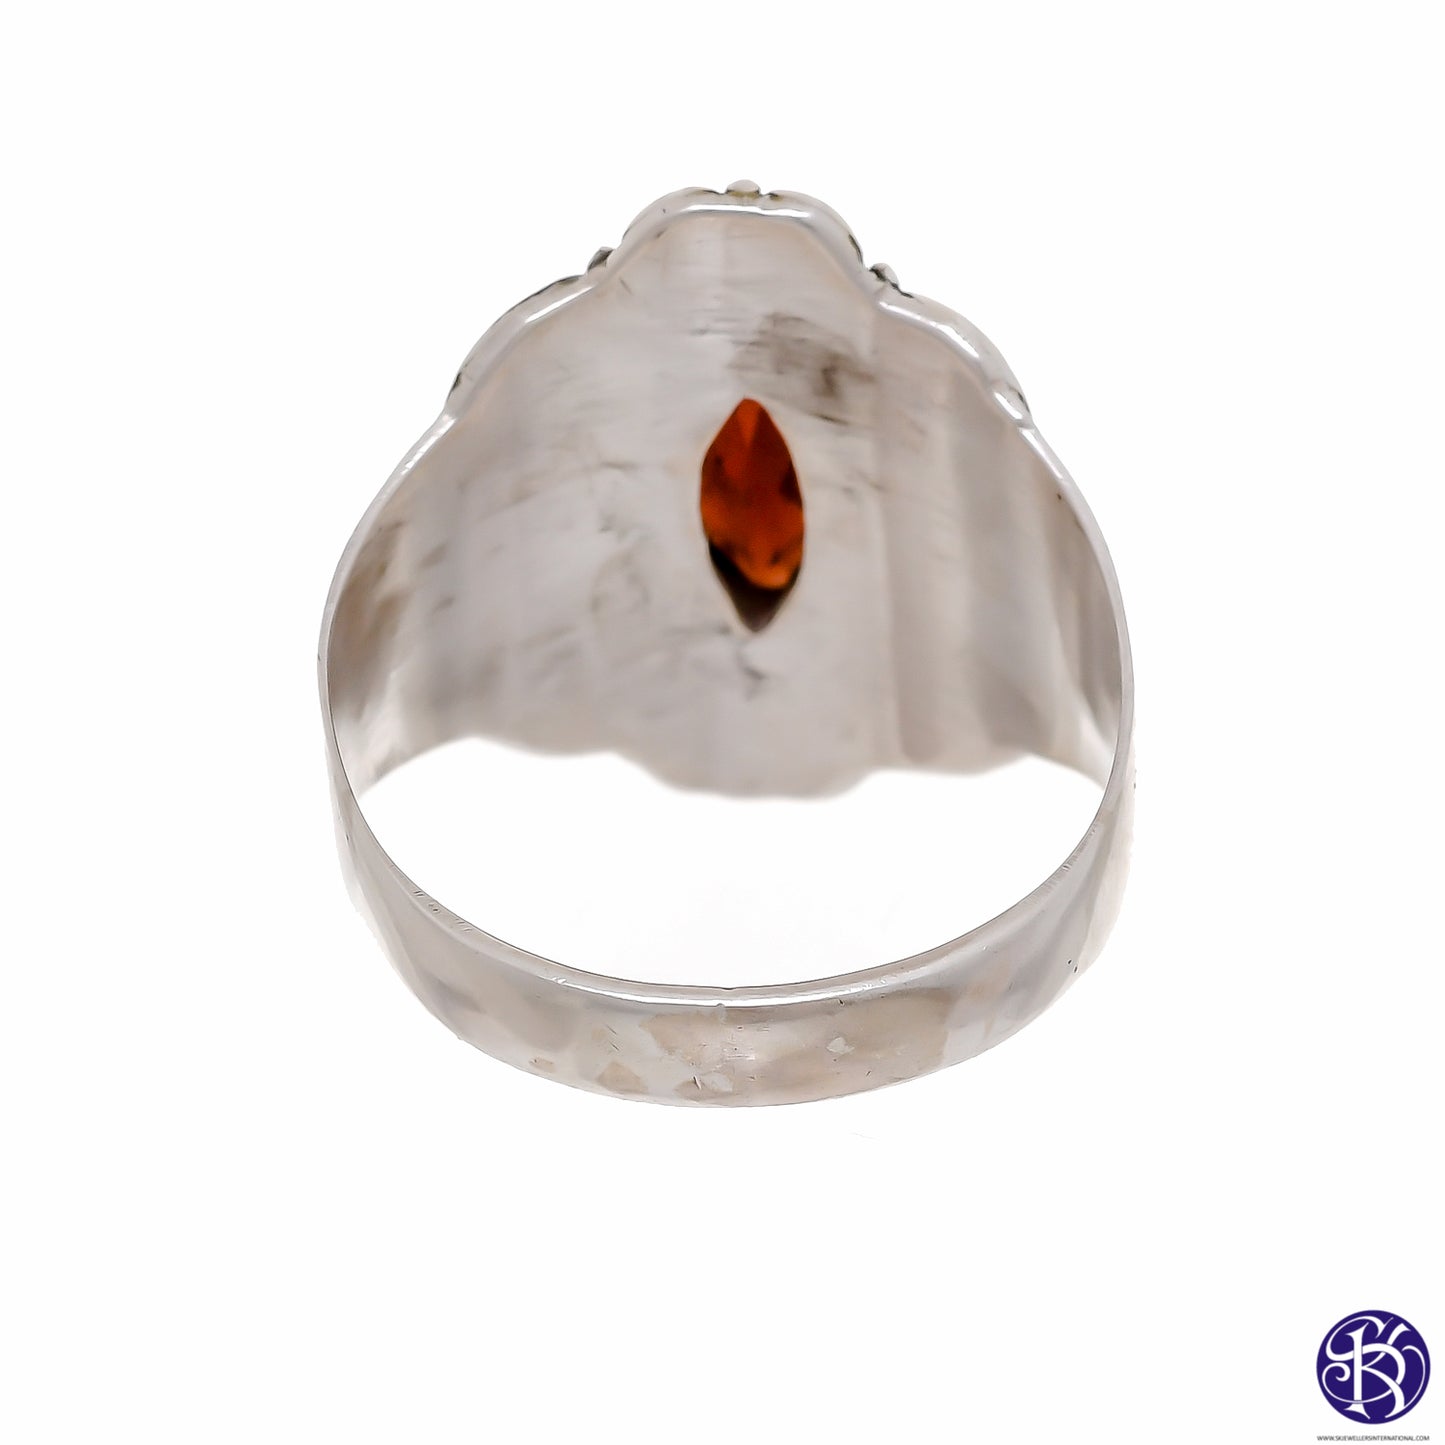 Sterling Silver Marquise cut Spiral ring - Available in 8 Stones